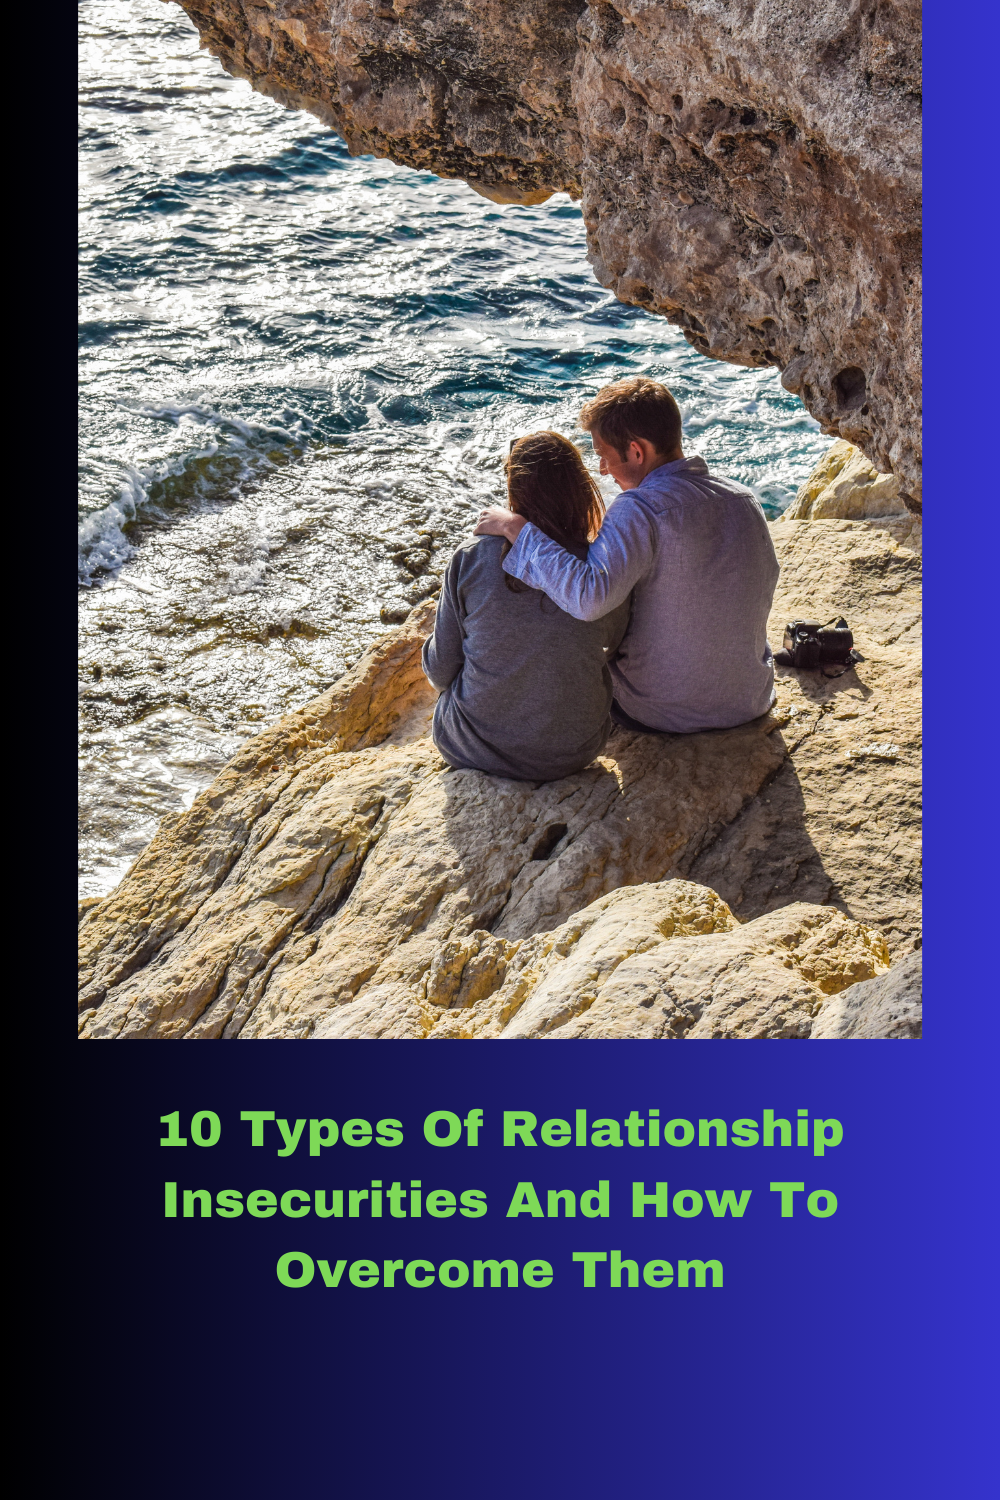 10 Types Of Relationship Insecurities And How To Overcome Them